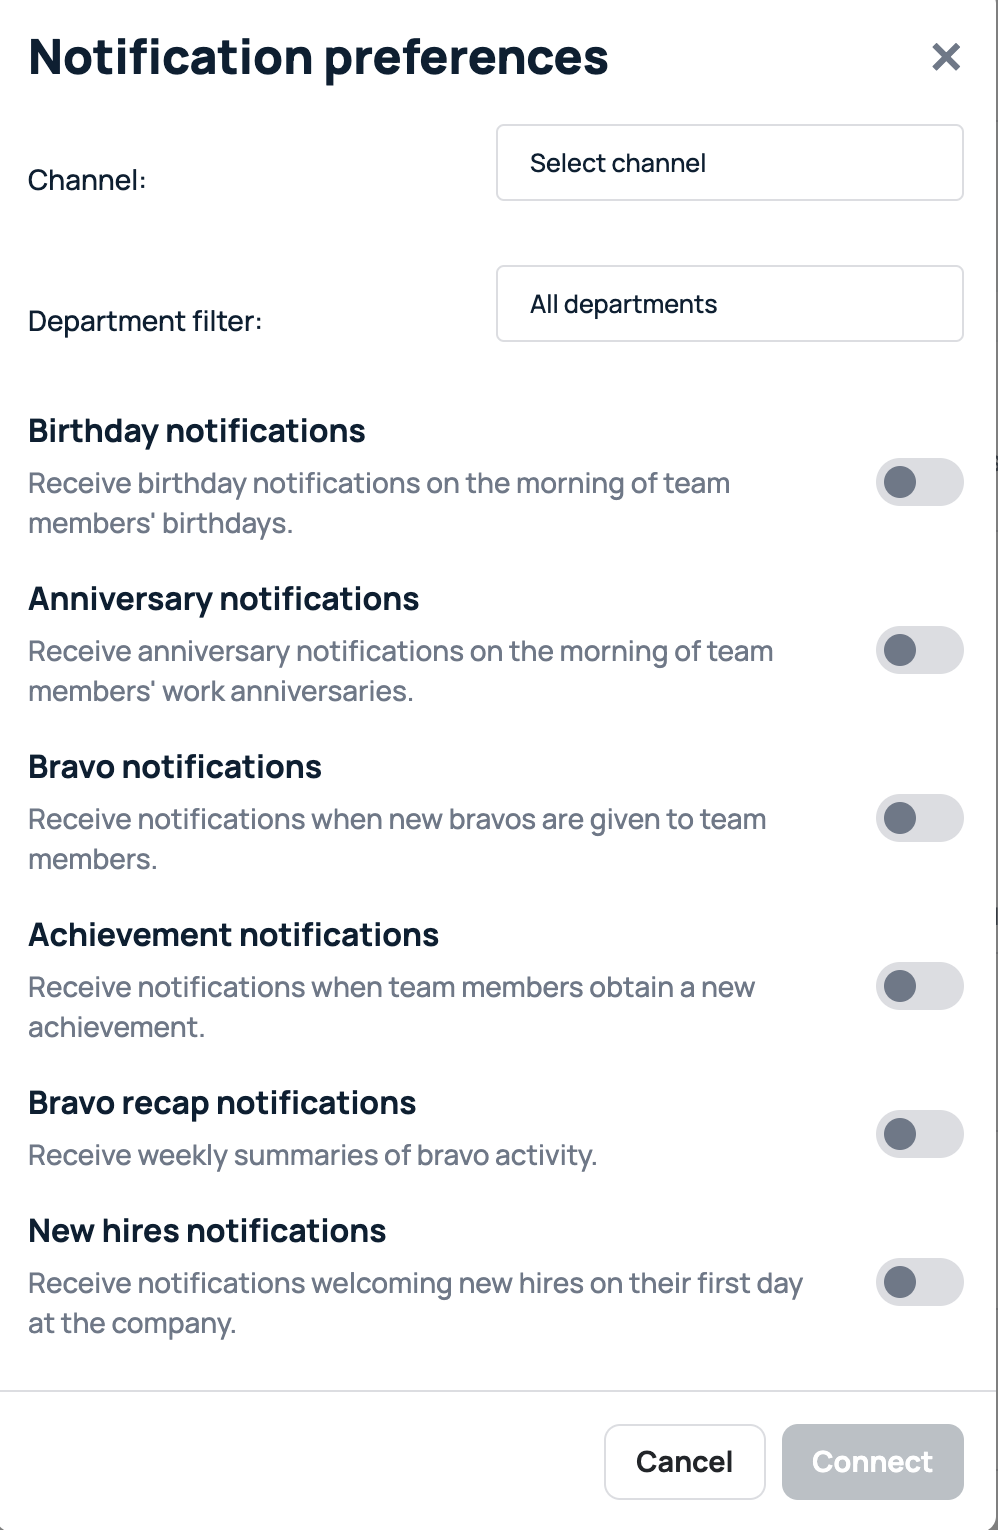 Notification preferences page